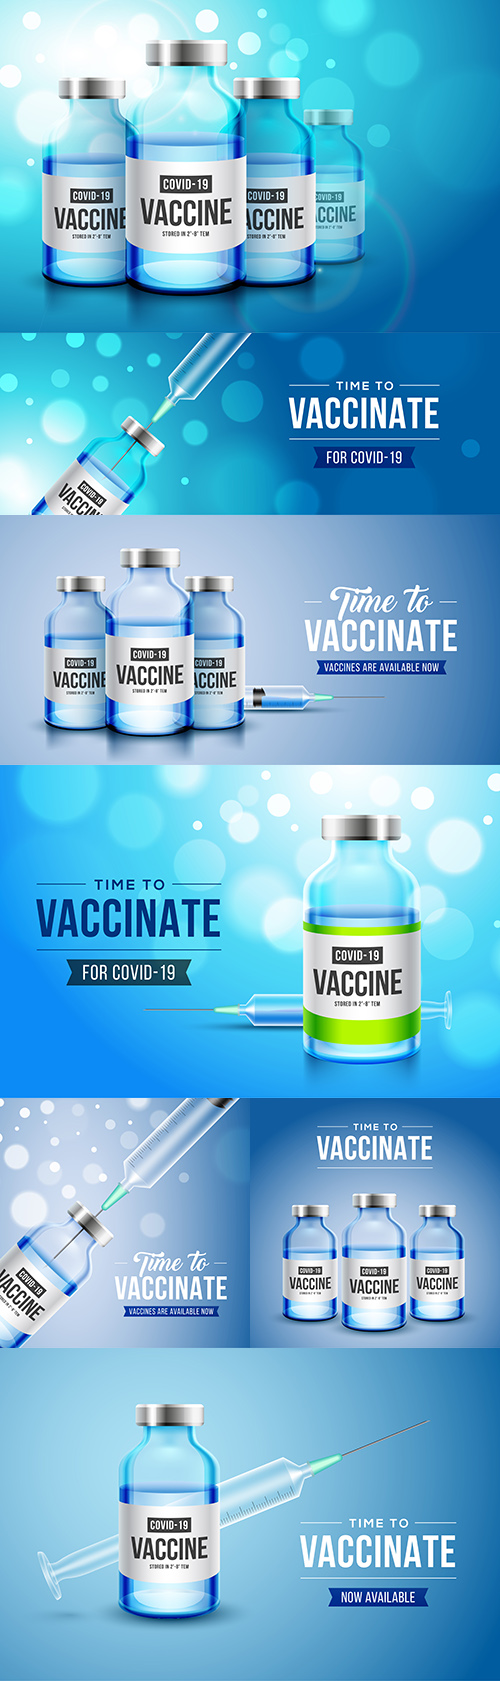 Vaccination against covid-19 coronavirus with realistic 3D bottle